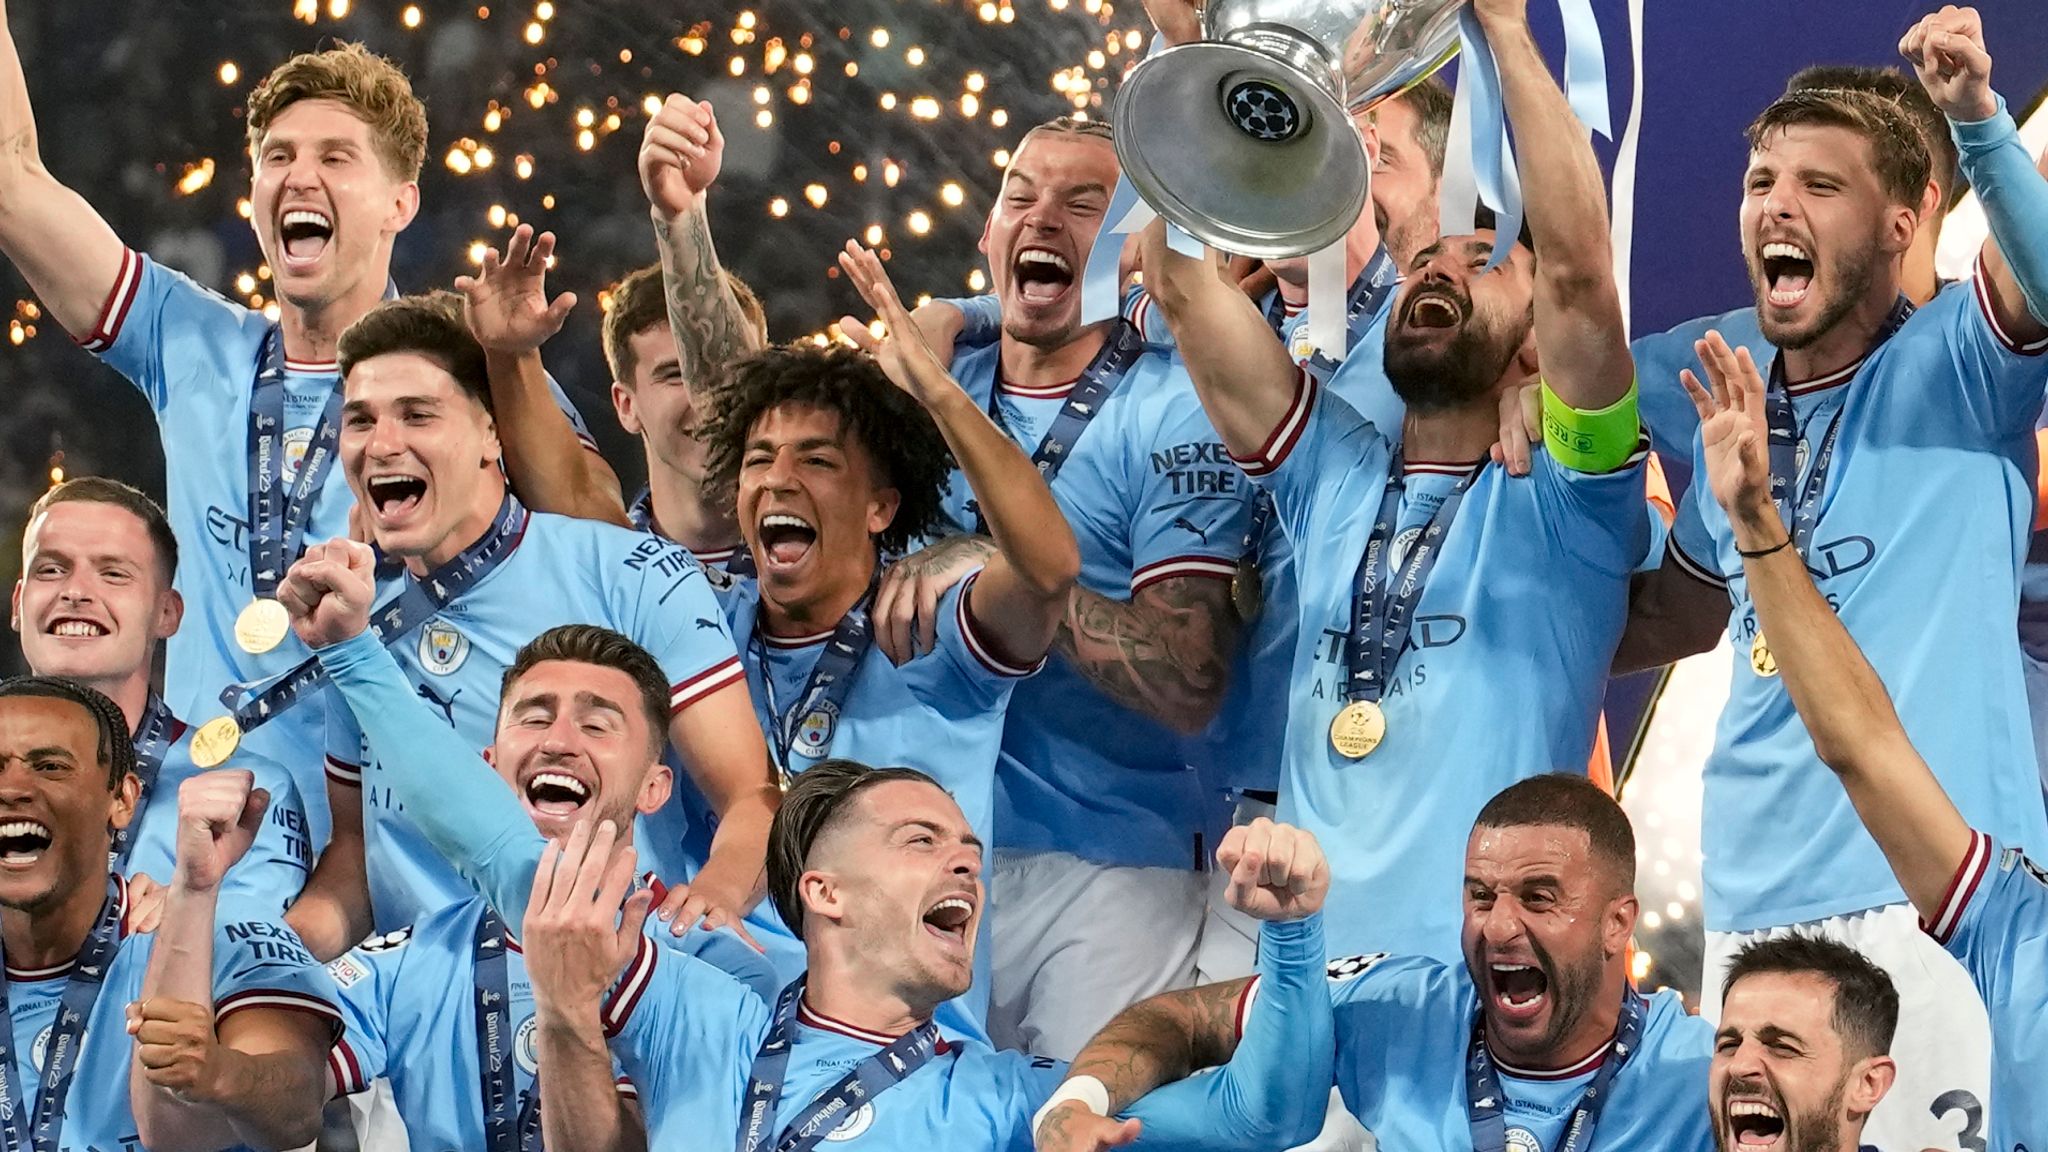 Manchester City wins Champions League for first time, beating